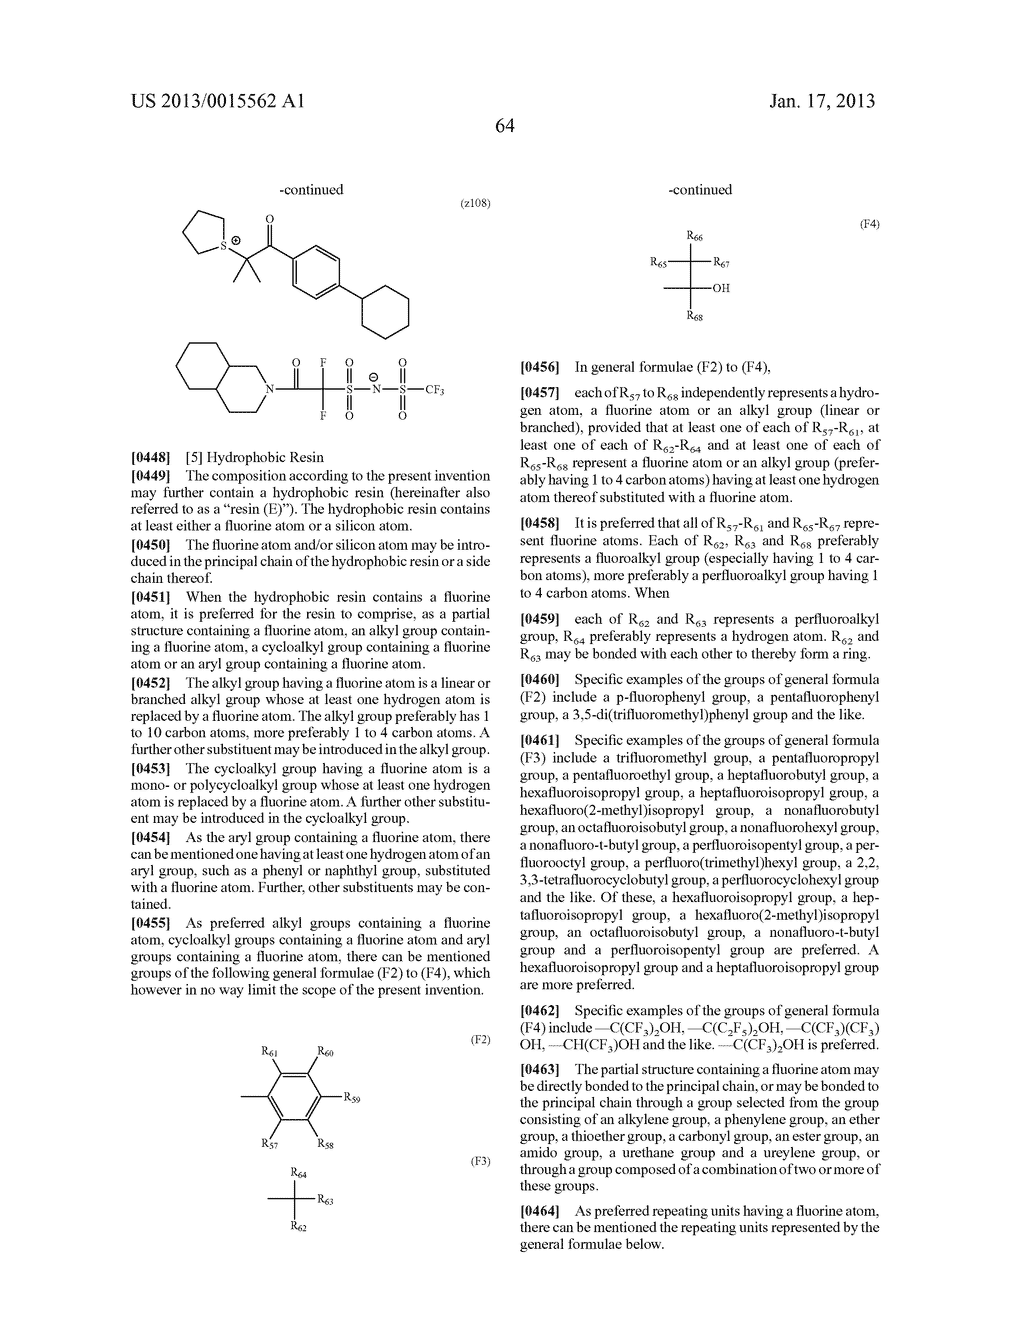 ACTINIC-RAY- OR RADIATION-SENSITIVE RESIN COMPOSITION, ACTINIC-RAY- OR     RADIATION-SENSITIVE FILM THEREFROM AND METHOD OF FORMING PATTERN USING     THE COMPOSITIONAANM Yamamoto; KeiAACI Haibara-gunAACO JPAAGP Yamamoto; Kei Haibara-gun JPAANM Fujita; MitsuhiroAACI Haibara-gunAACO JPAAGP Fujita; Mitsuhiro Haibara-gun JPAANM Matsuda; TomokiAACI Haibara-gunAACO JPAAGP Matsuda; Tomoki Haibara-gun JP - diagram, schematic, and image 65